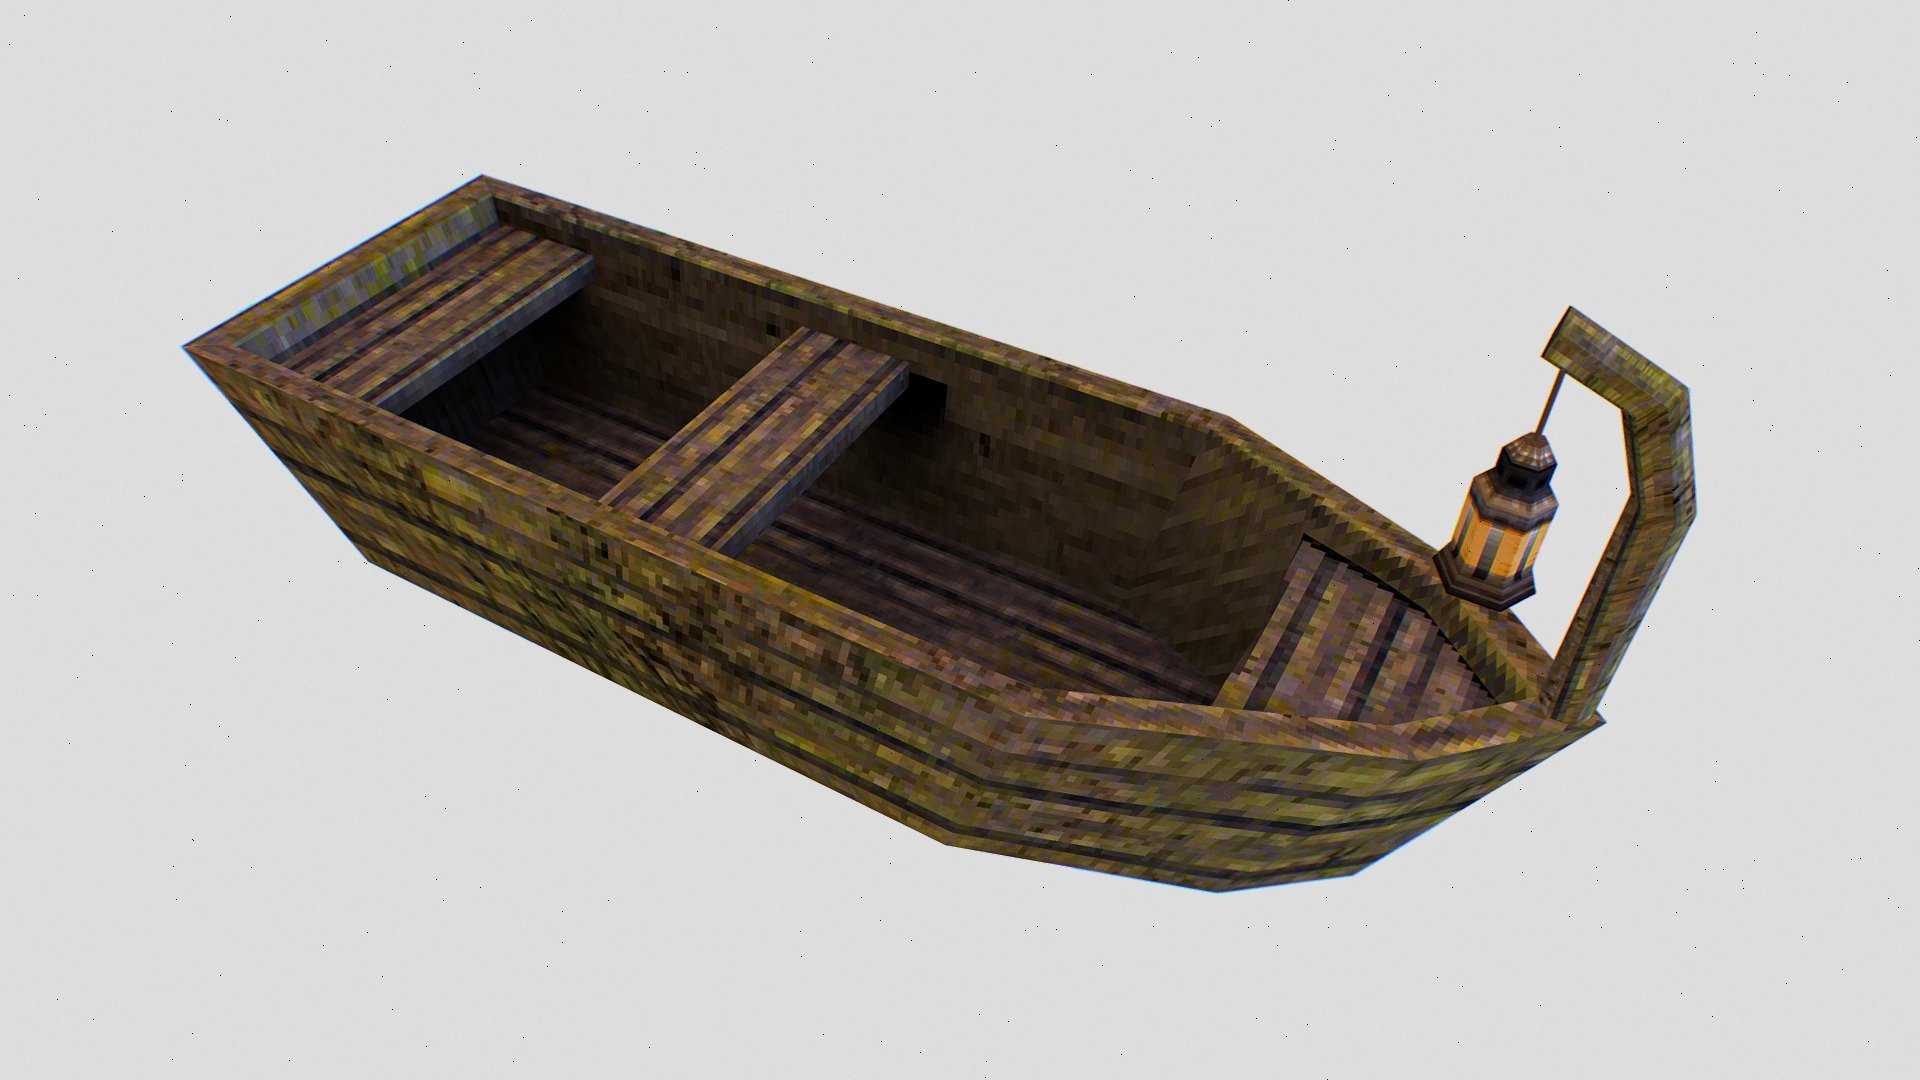 A  boat with the lantern

Designed for retro inspired projects or mobile games.

My YouTube channel where I document my game dev journey - https://www.youtube.com/@AaronMYoung
Contact me on - Aaronmyoung94@gmail.com - PS1 Style Asset - Boat - 3D model by AaronMYoung 3d model